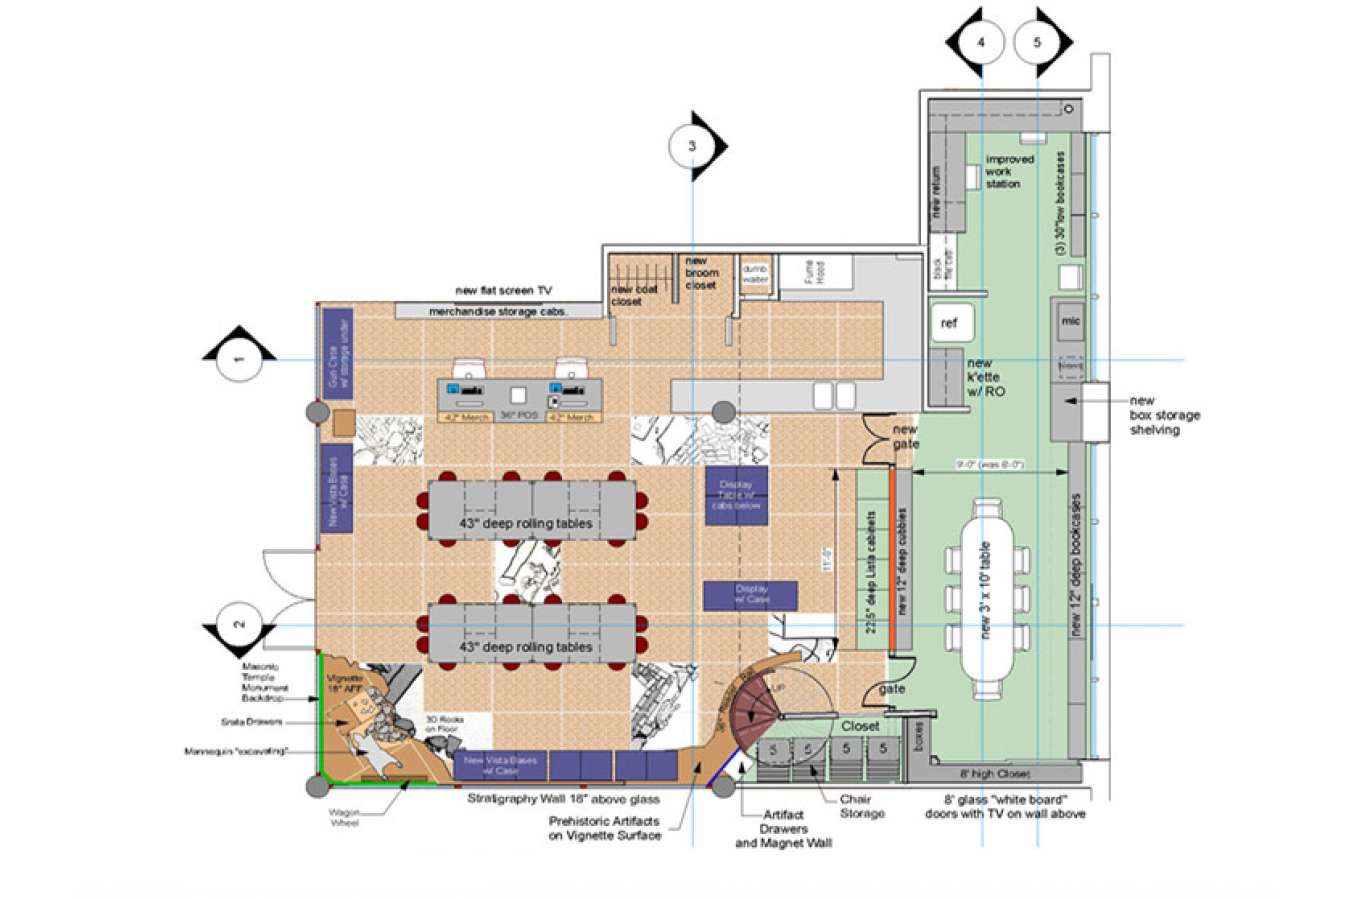 1 CAAM 2FloorPlanFinal.jpg : Archeological site images are inset into carpet for experiential teaching